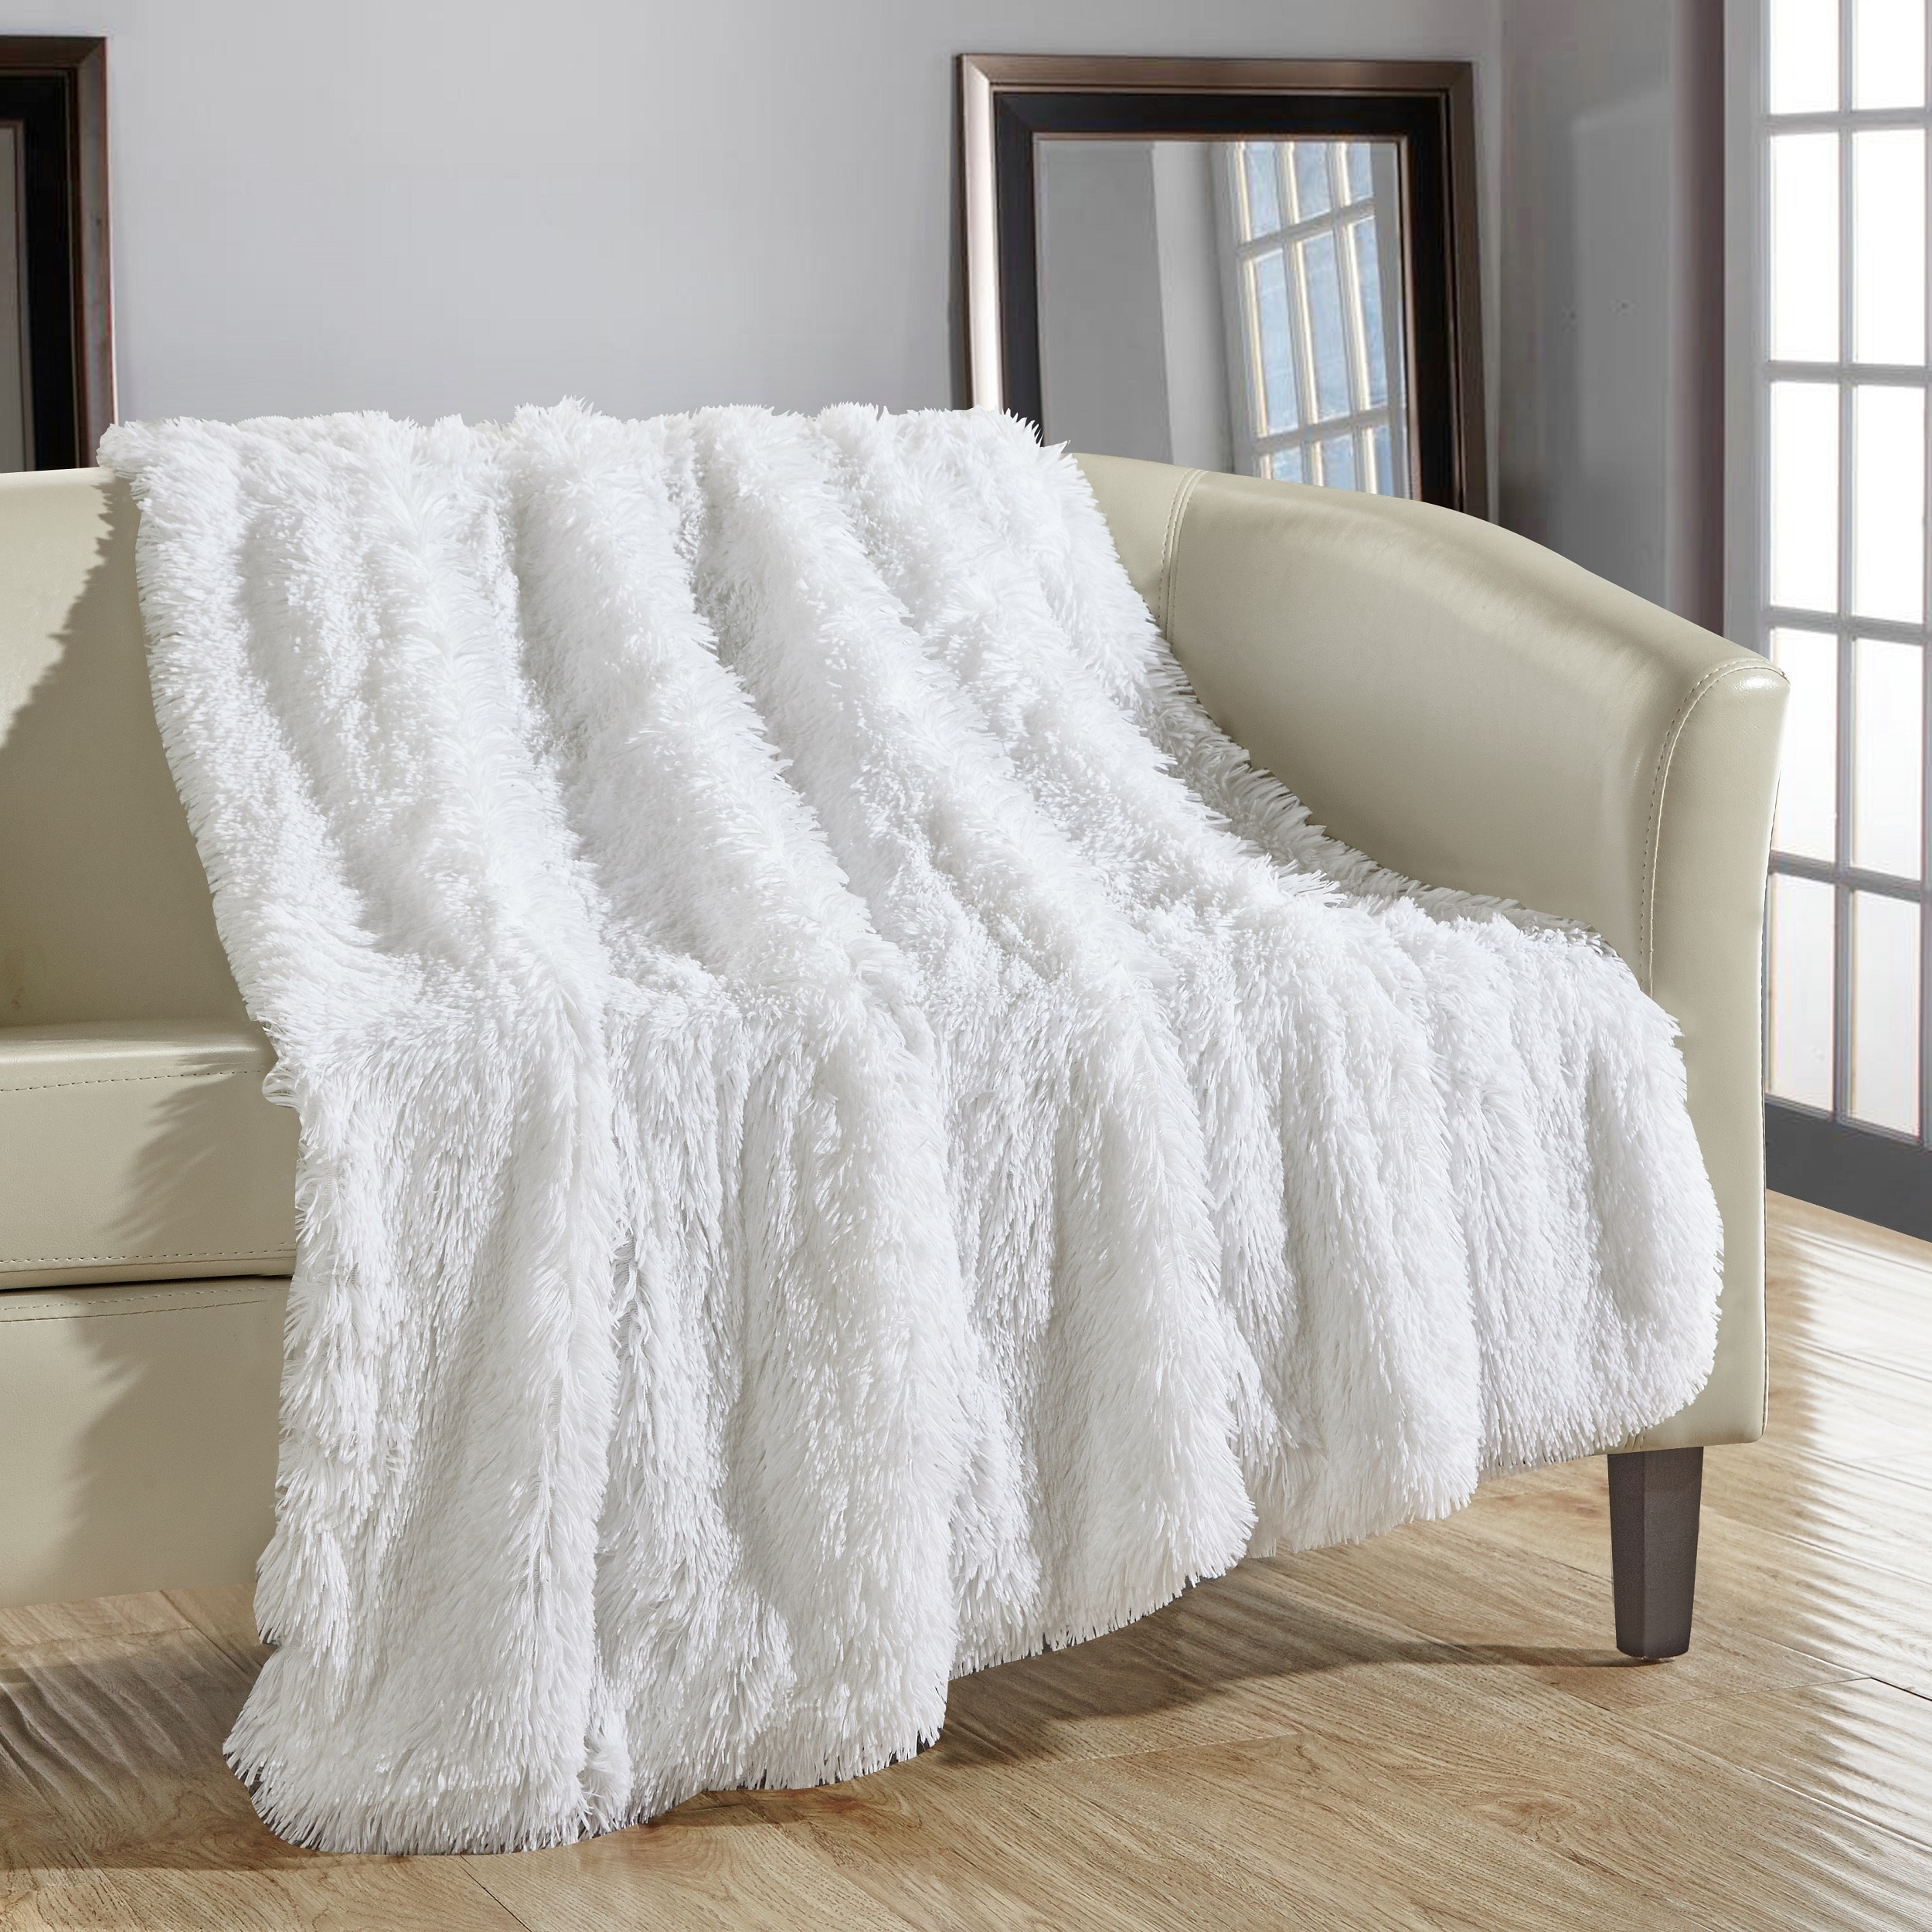 Chic Home Juneau Faux Fur White Throw Blanket On Sale Overstock 12312278